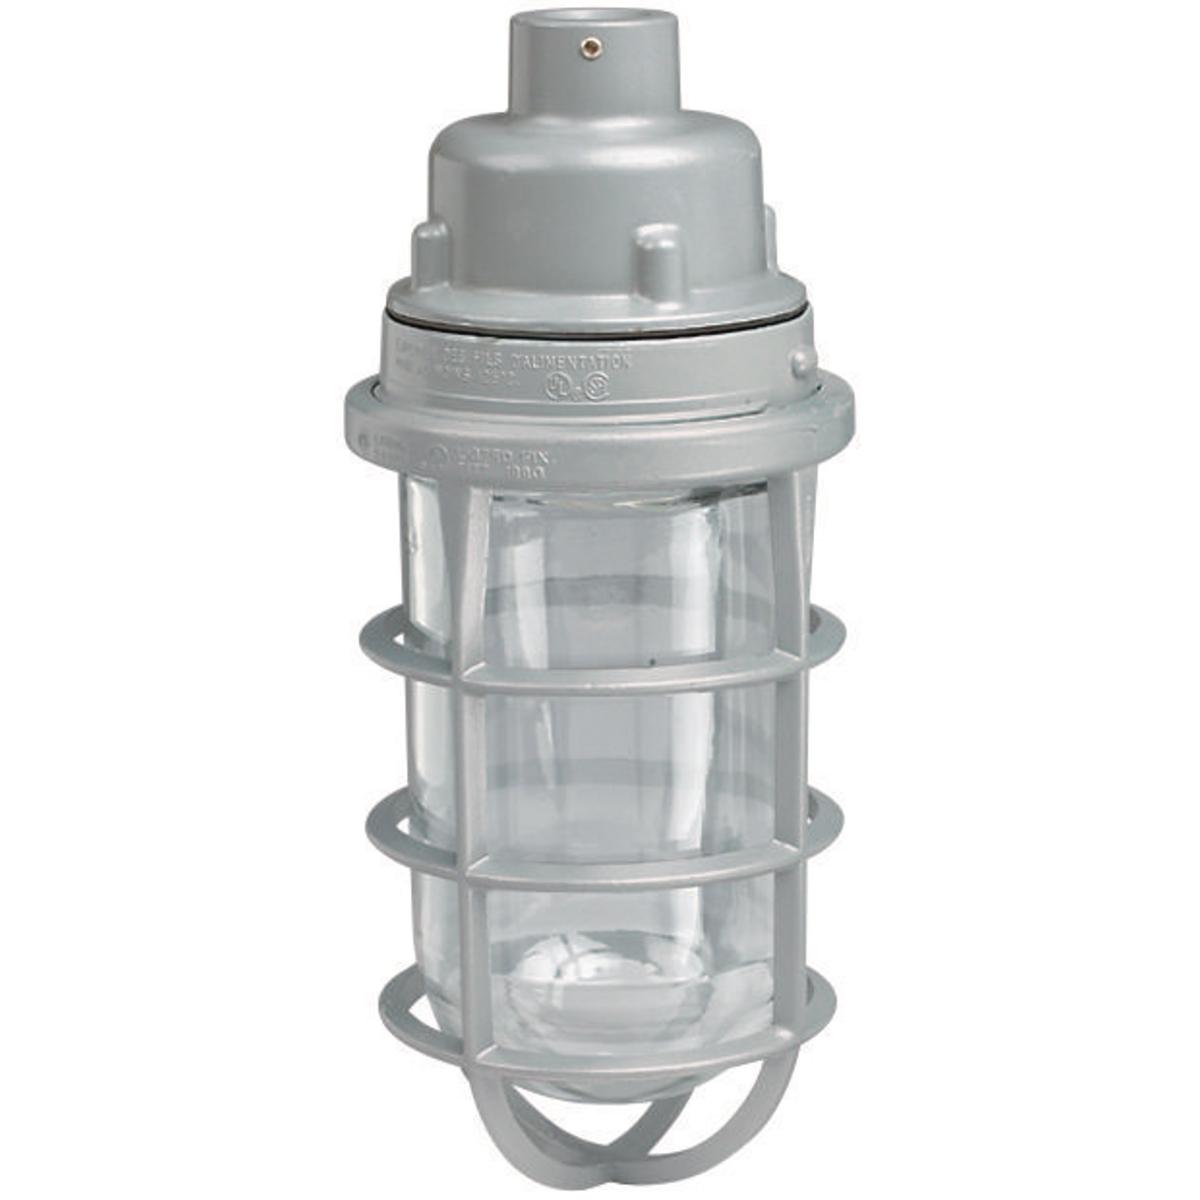 Hubbell VUAG-1-200 200W V Series Incandescent - Pendant - 1/2" Hub With Globe  ; Electrostatically applied epoxy/polyester finish ; Modular design ; Hubs are threaded for attachment to conduit ; Set screws in pendant fixture ; Copper-free aluminum (less than .004%) ; The V 